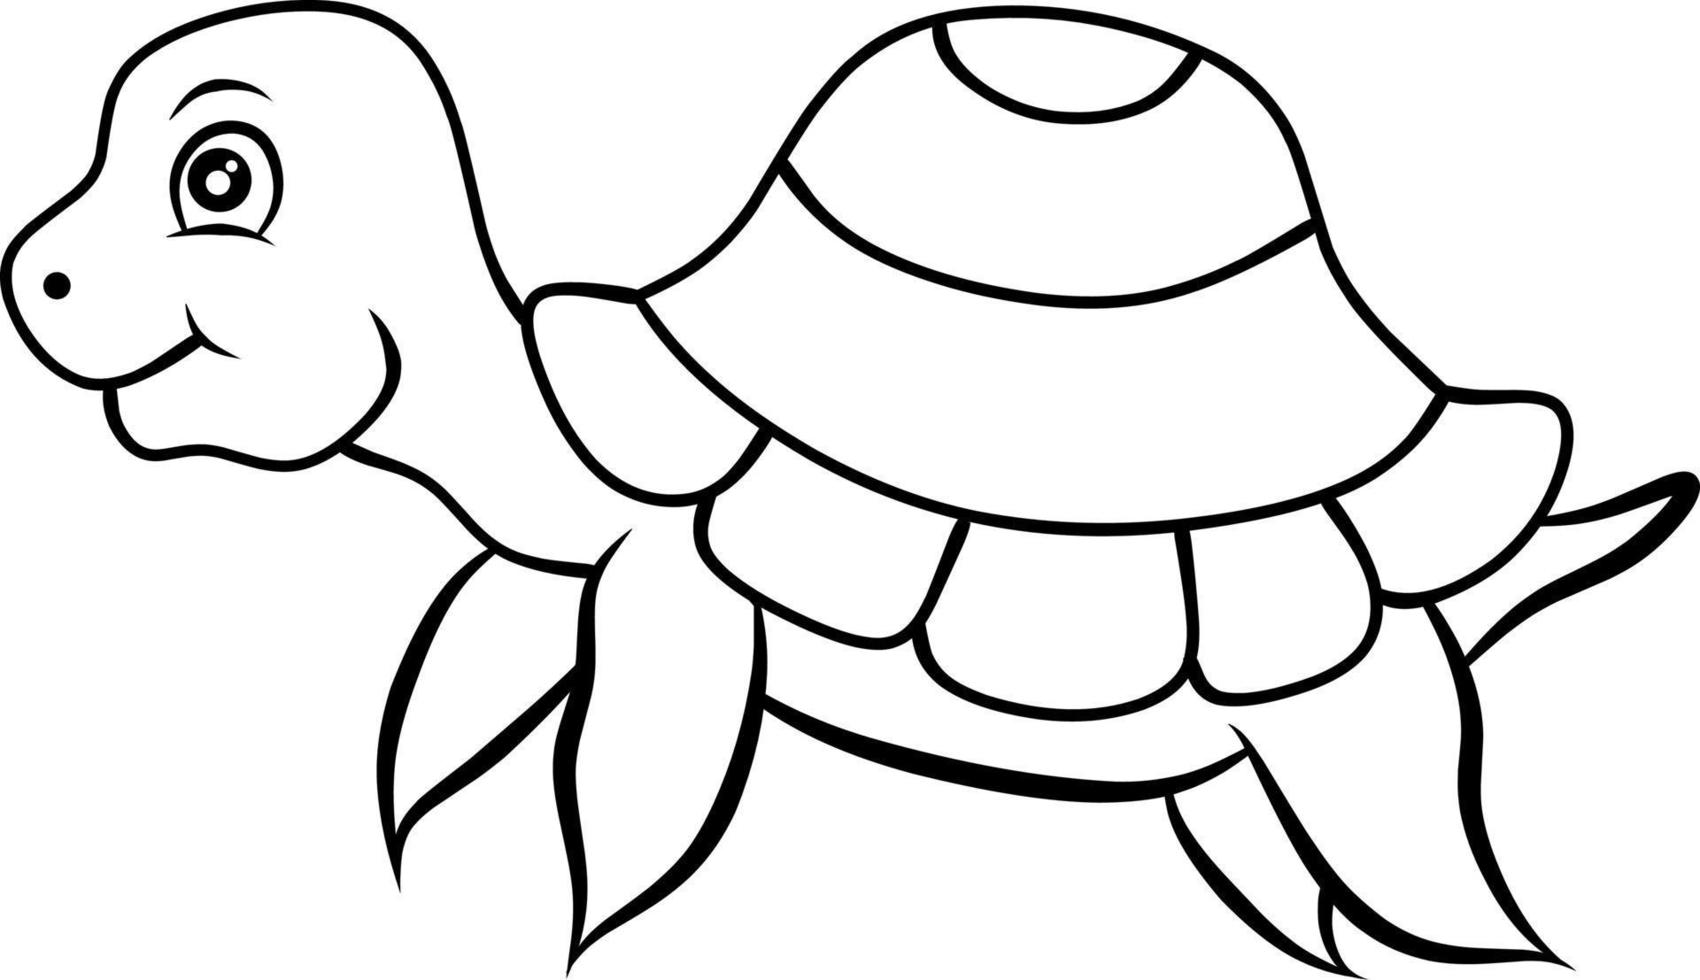 Little sea turtle coloring page isolated image character vector